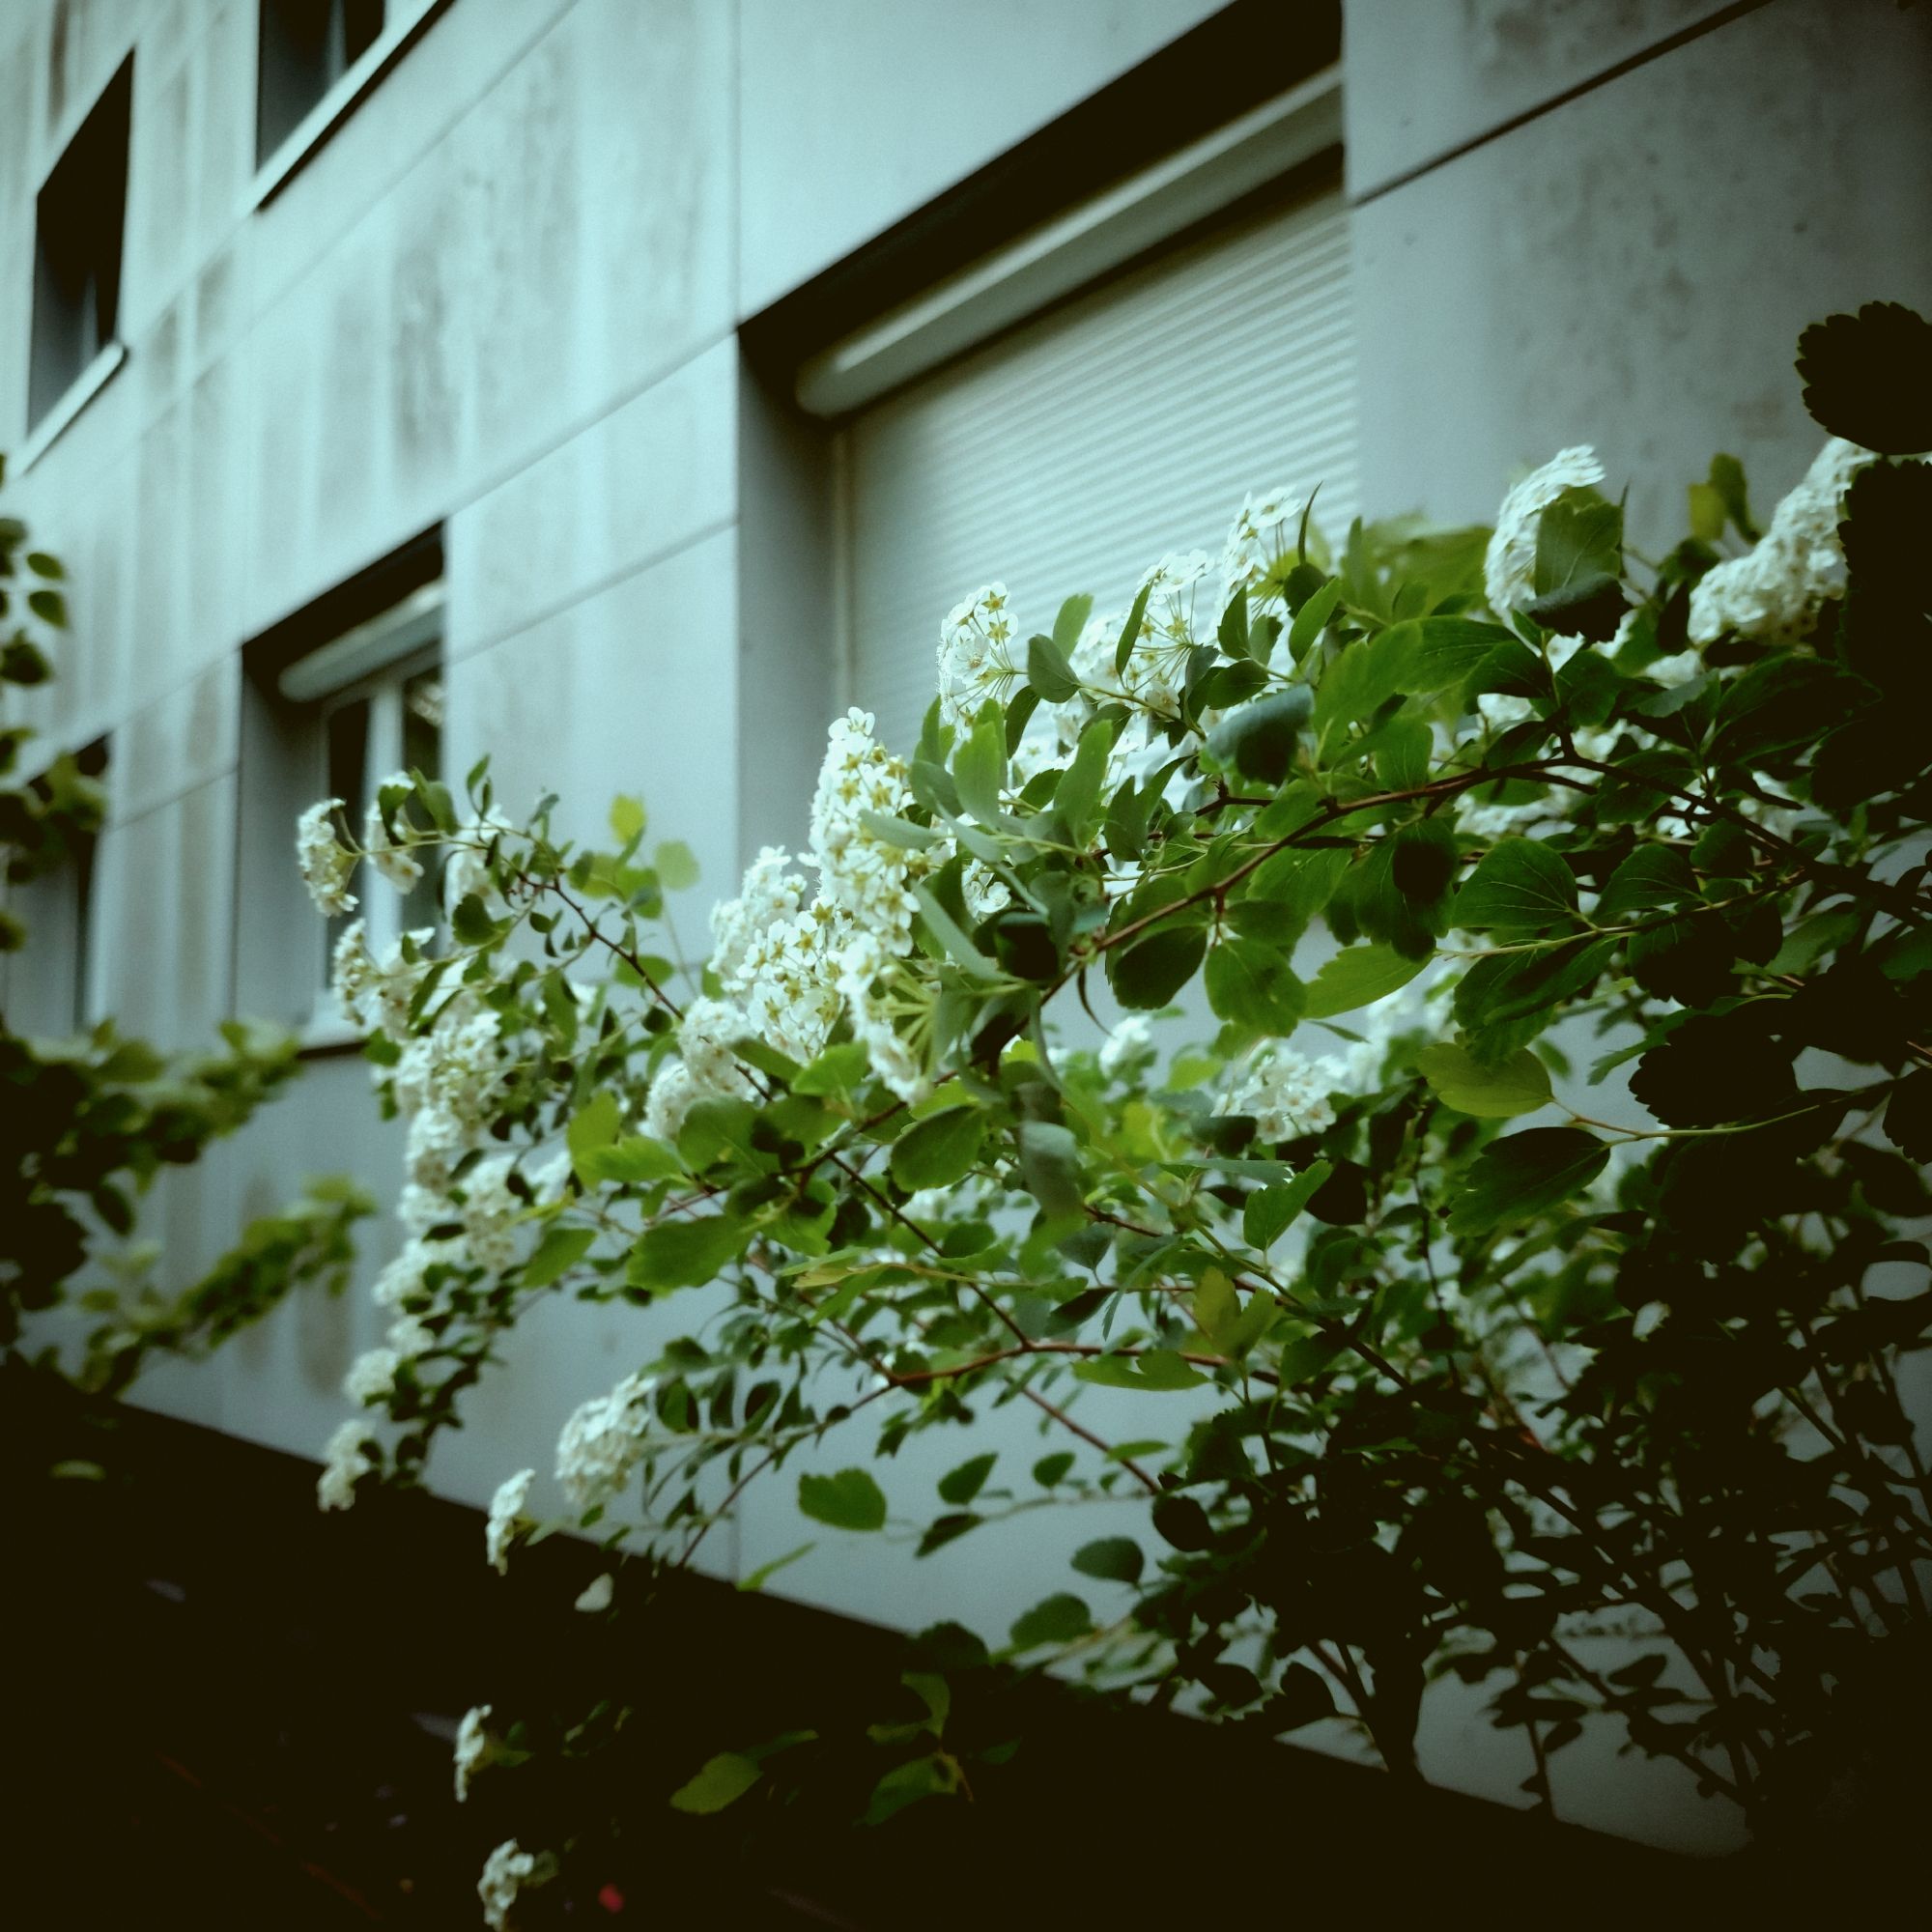 White blossoms in front of a grey facade. A closed window.